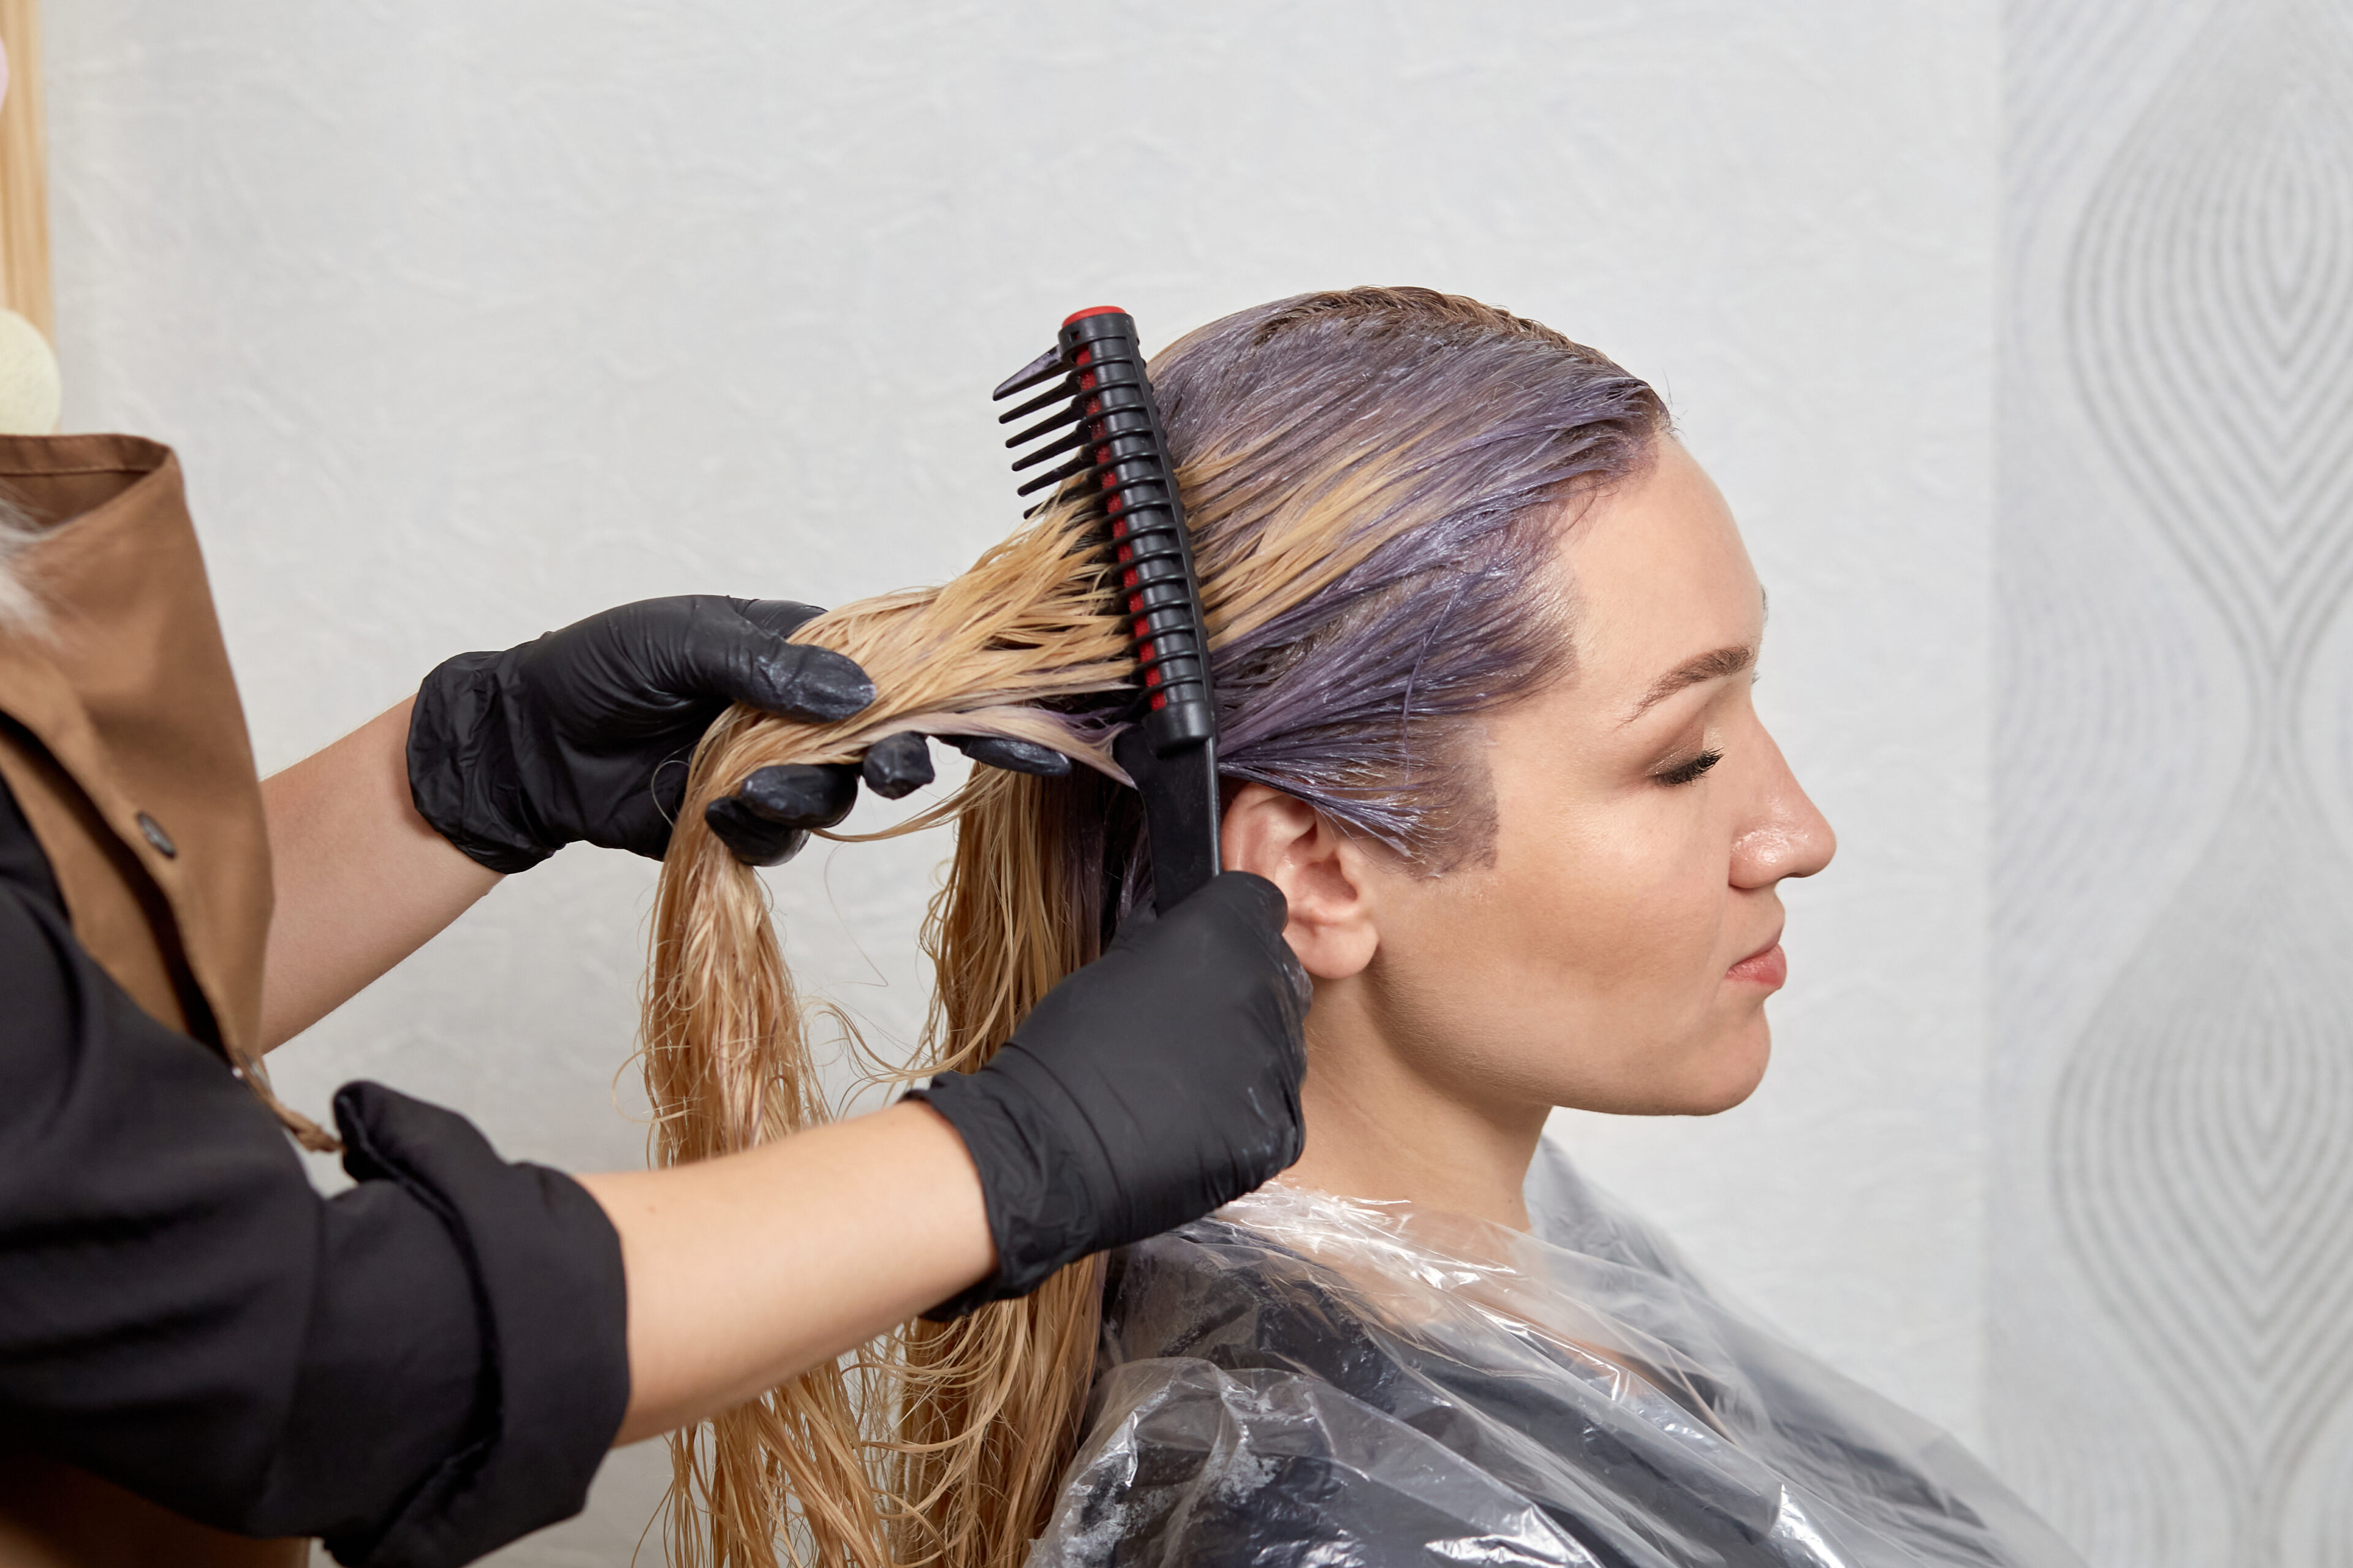 Application of the neutralizer for hair after rising out the perm solution